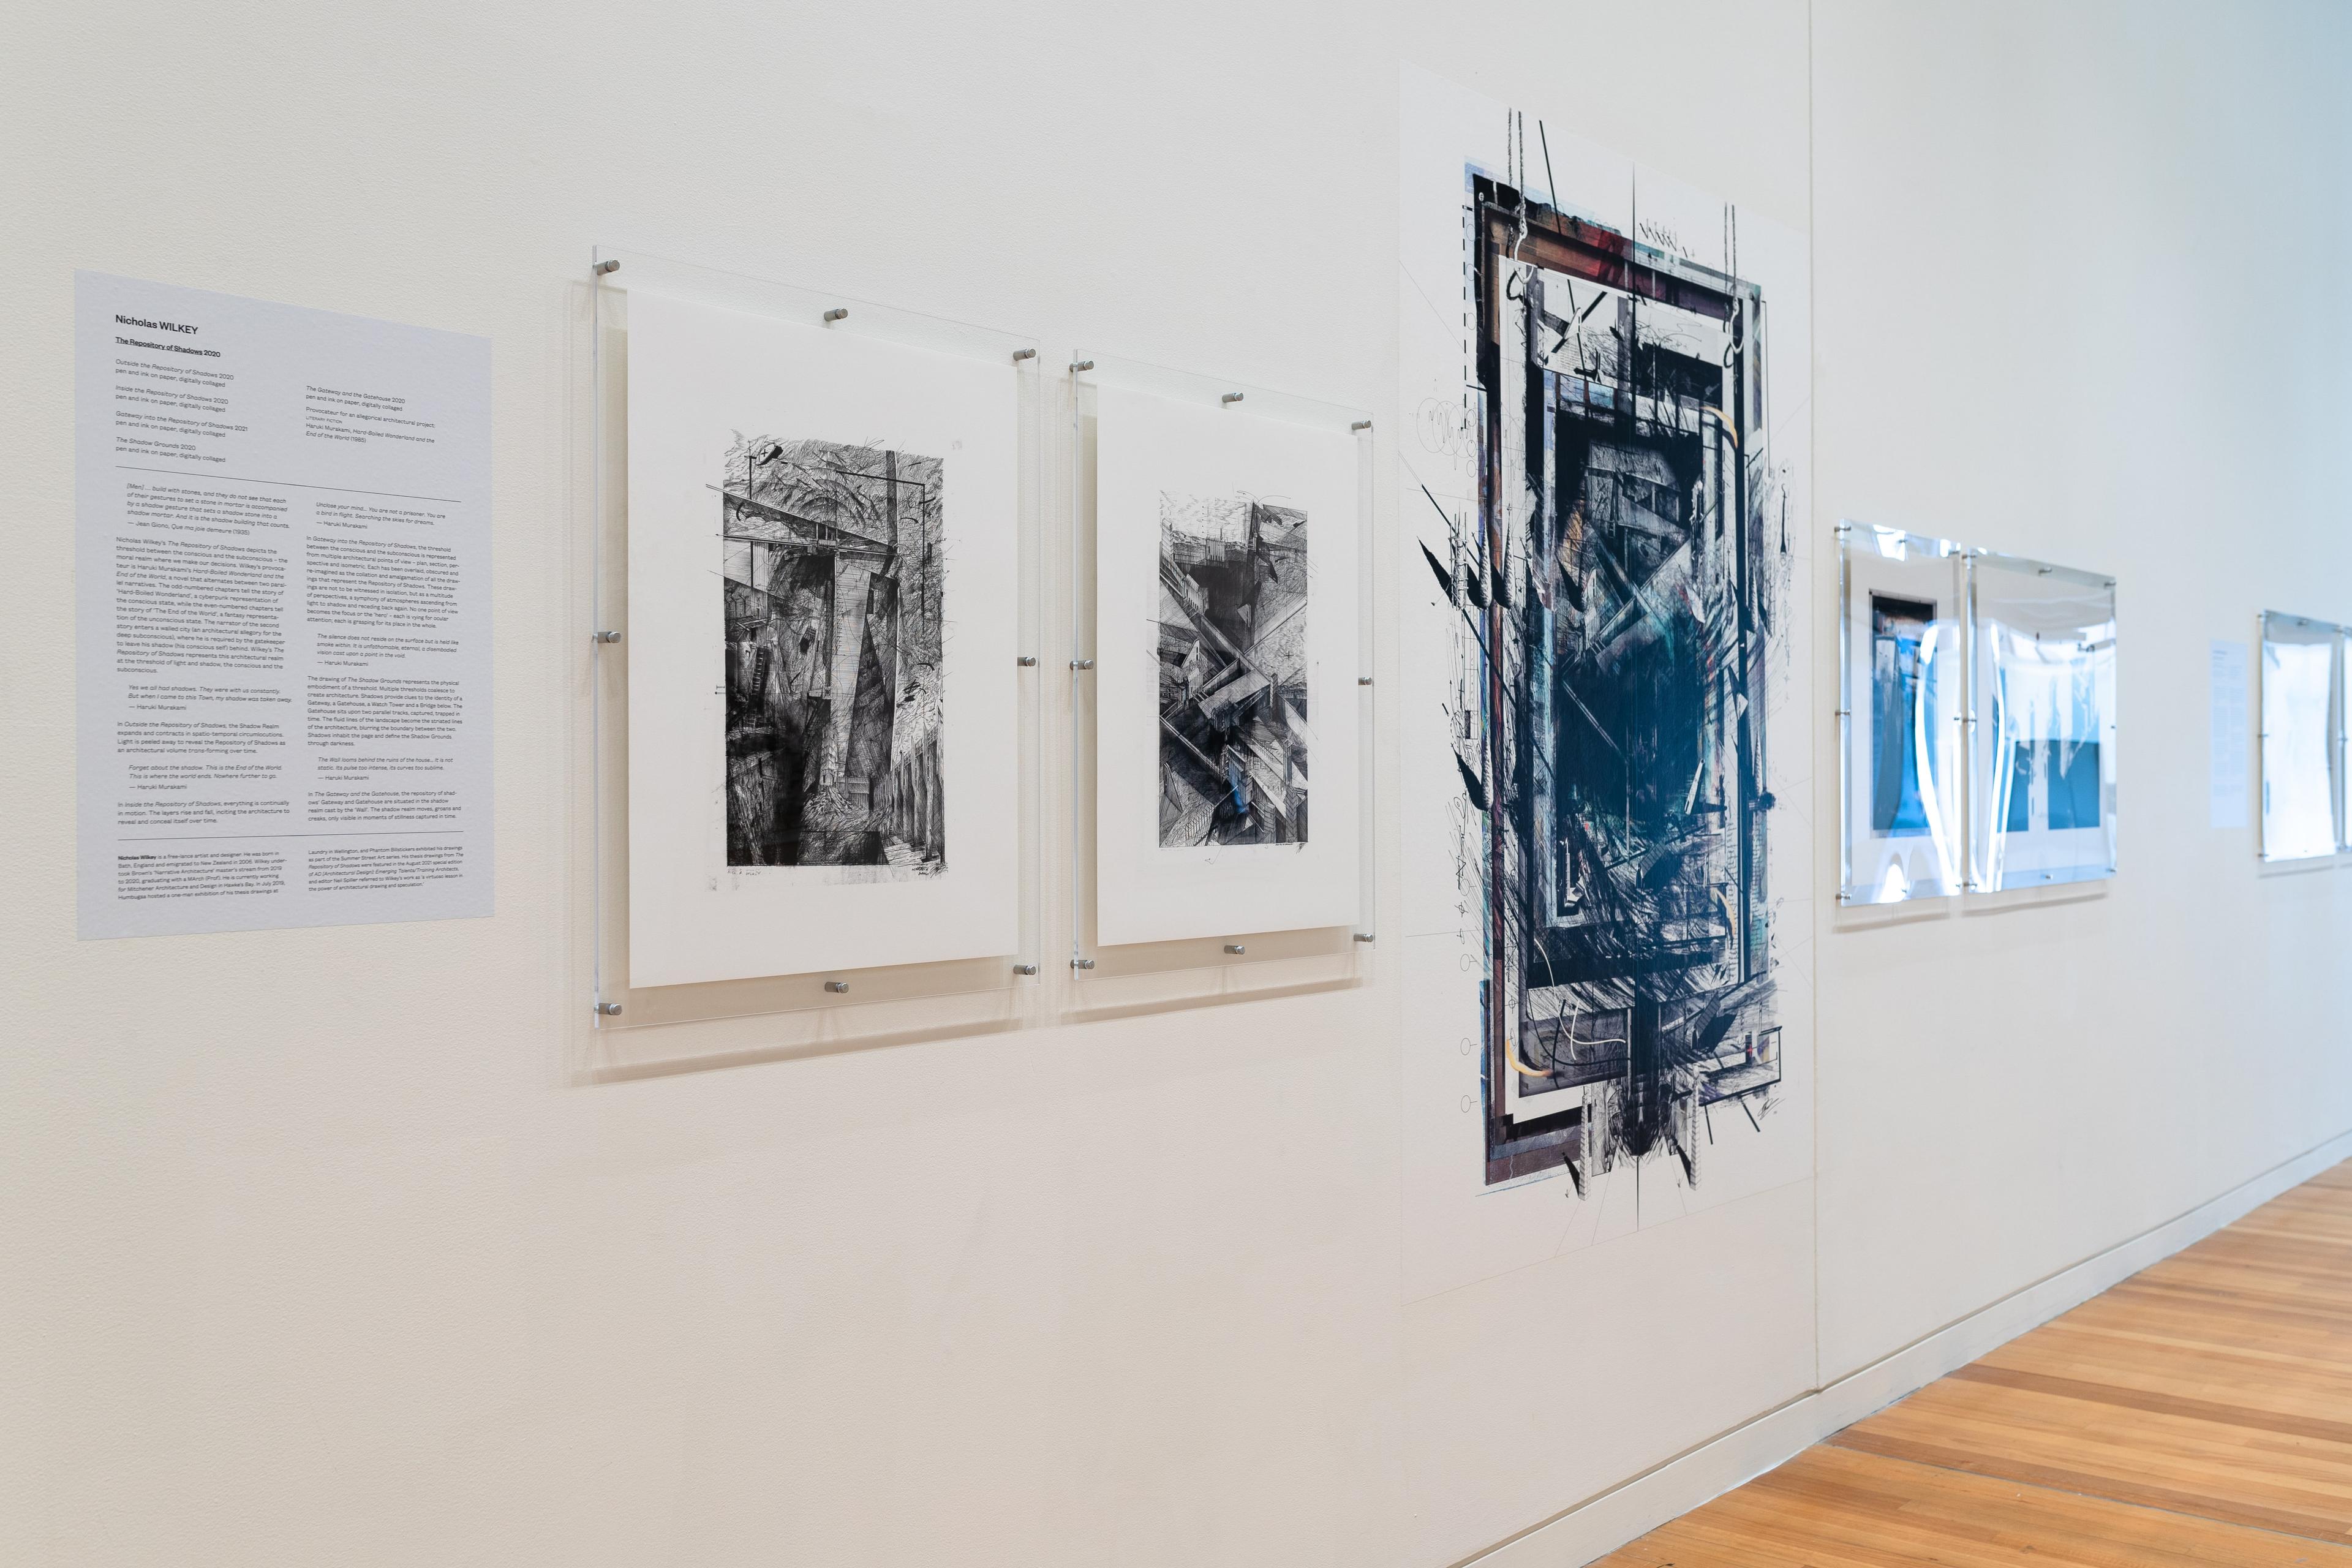 An oblique view of a gallery wall with text and 5 square architectural images in perspex mounts, and a larger print in the centre of a dark angular drawing. Daniel K. Brown 